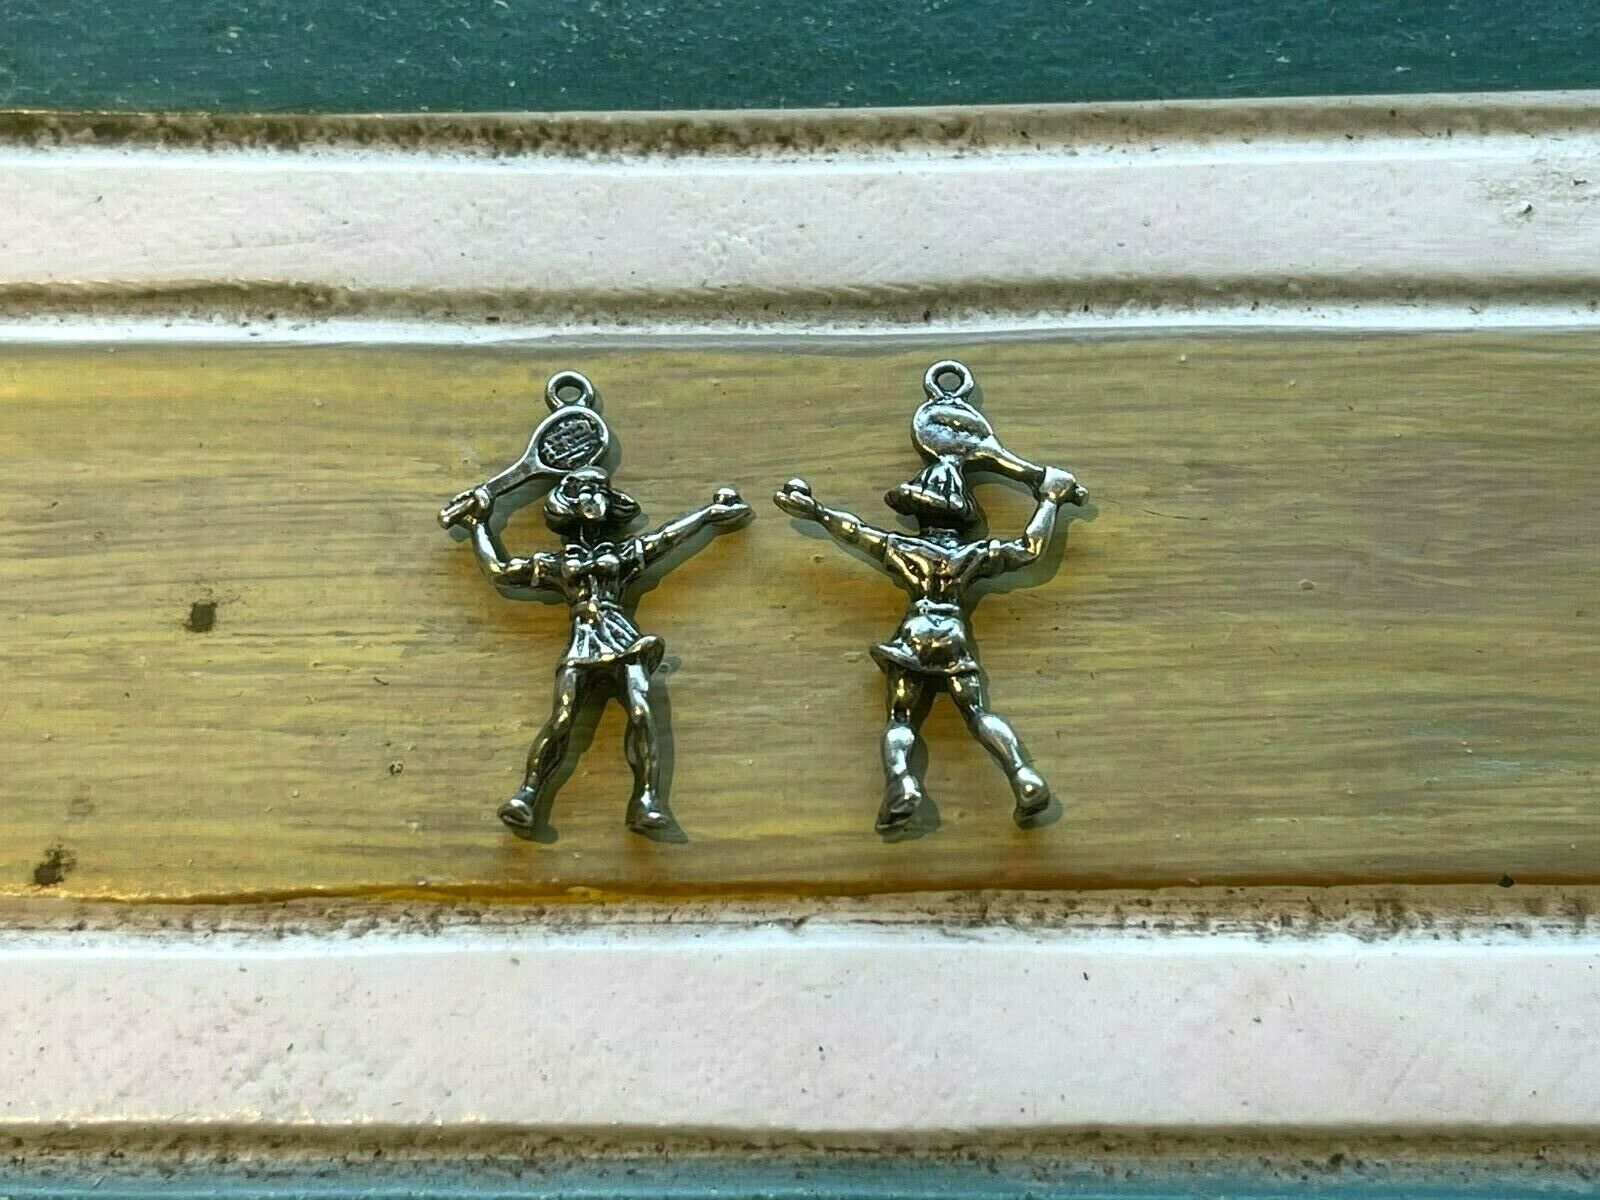 Us. Open Sports Woman  2 Girl Tennis Player Pewter Charm Or Pendants All New.